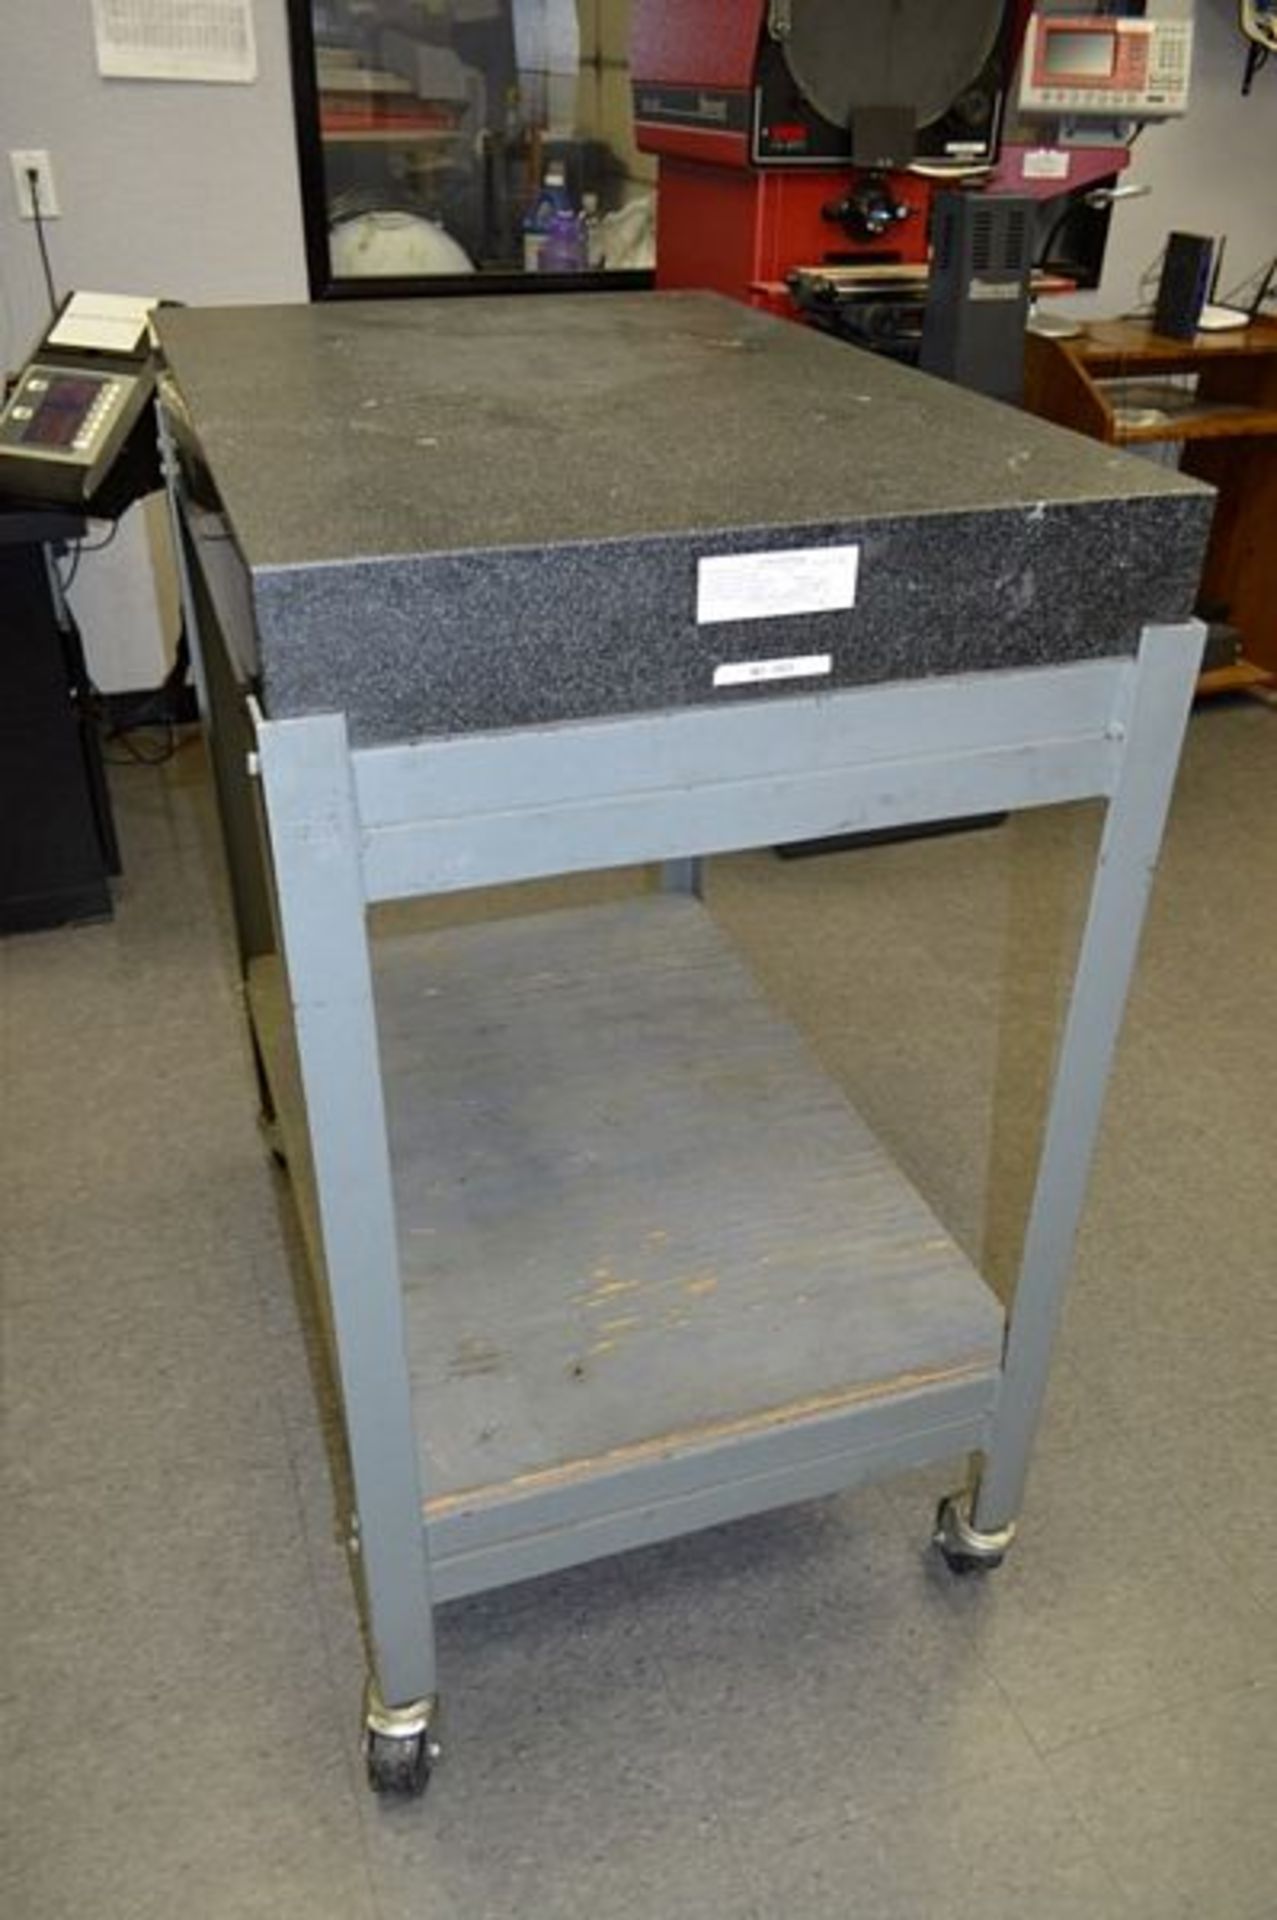 Inspection Table with Rolling Cart Table Size 36 1/2" x 24 1/2" and 4 1/4" Thick, Last Calibrated